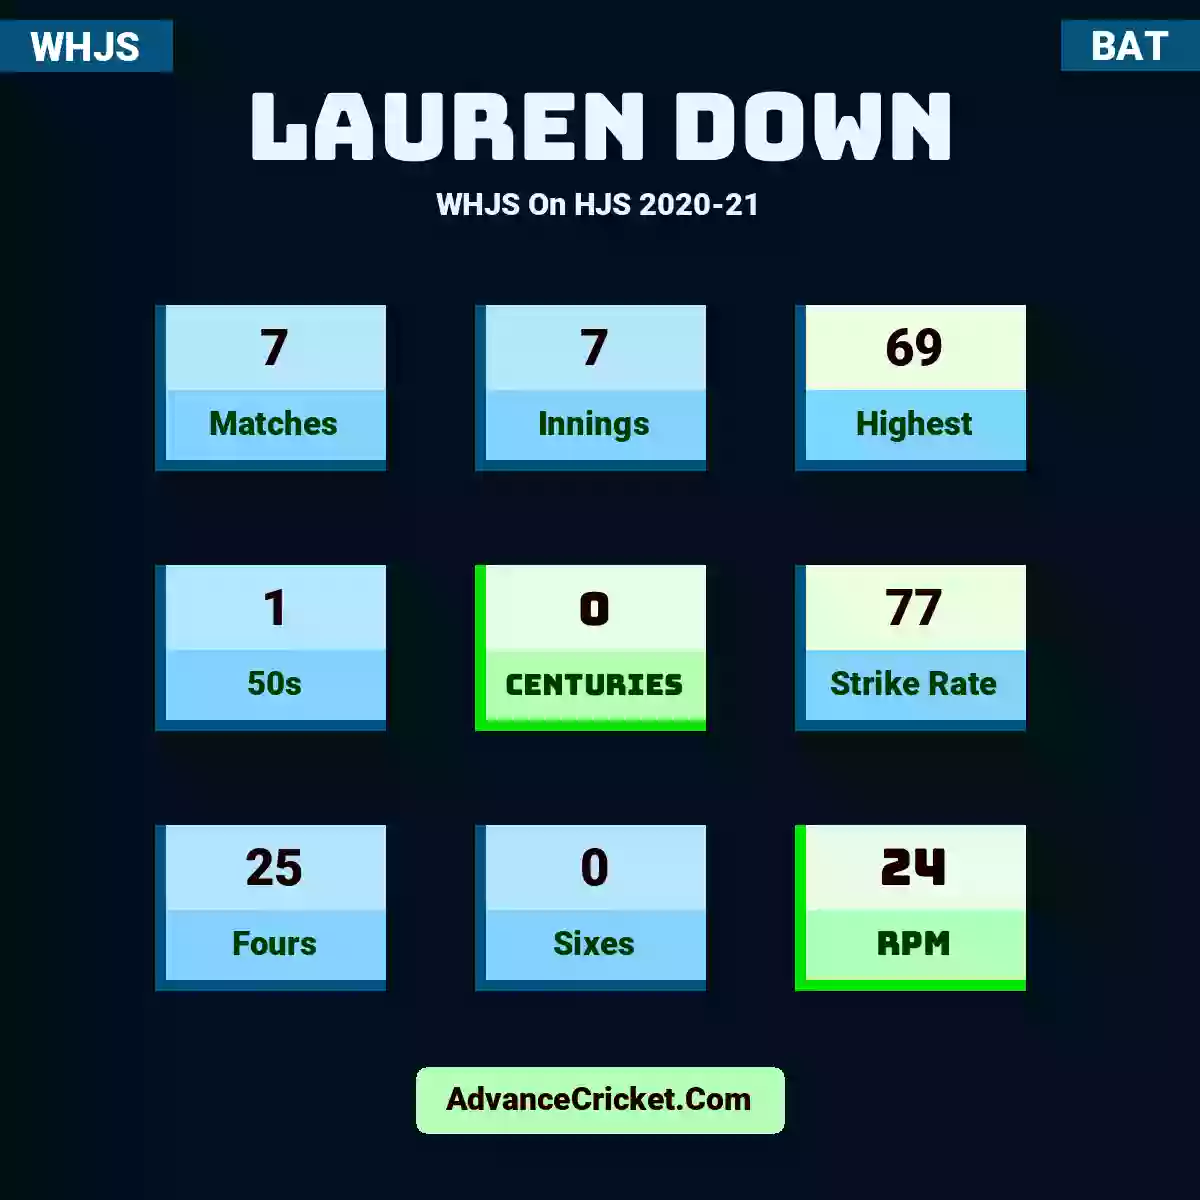 Lauren Down WHJS  On HJS 2020-21, Lauren Down played 7 matches, scored 69 runs as highest, 1 half-centuries, and 0 centuries, with a strike rate of 77. L.Down hit 25 fours and 0 sixes, with an RPM of 24.